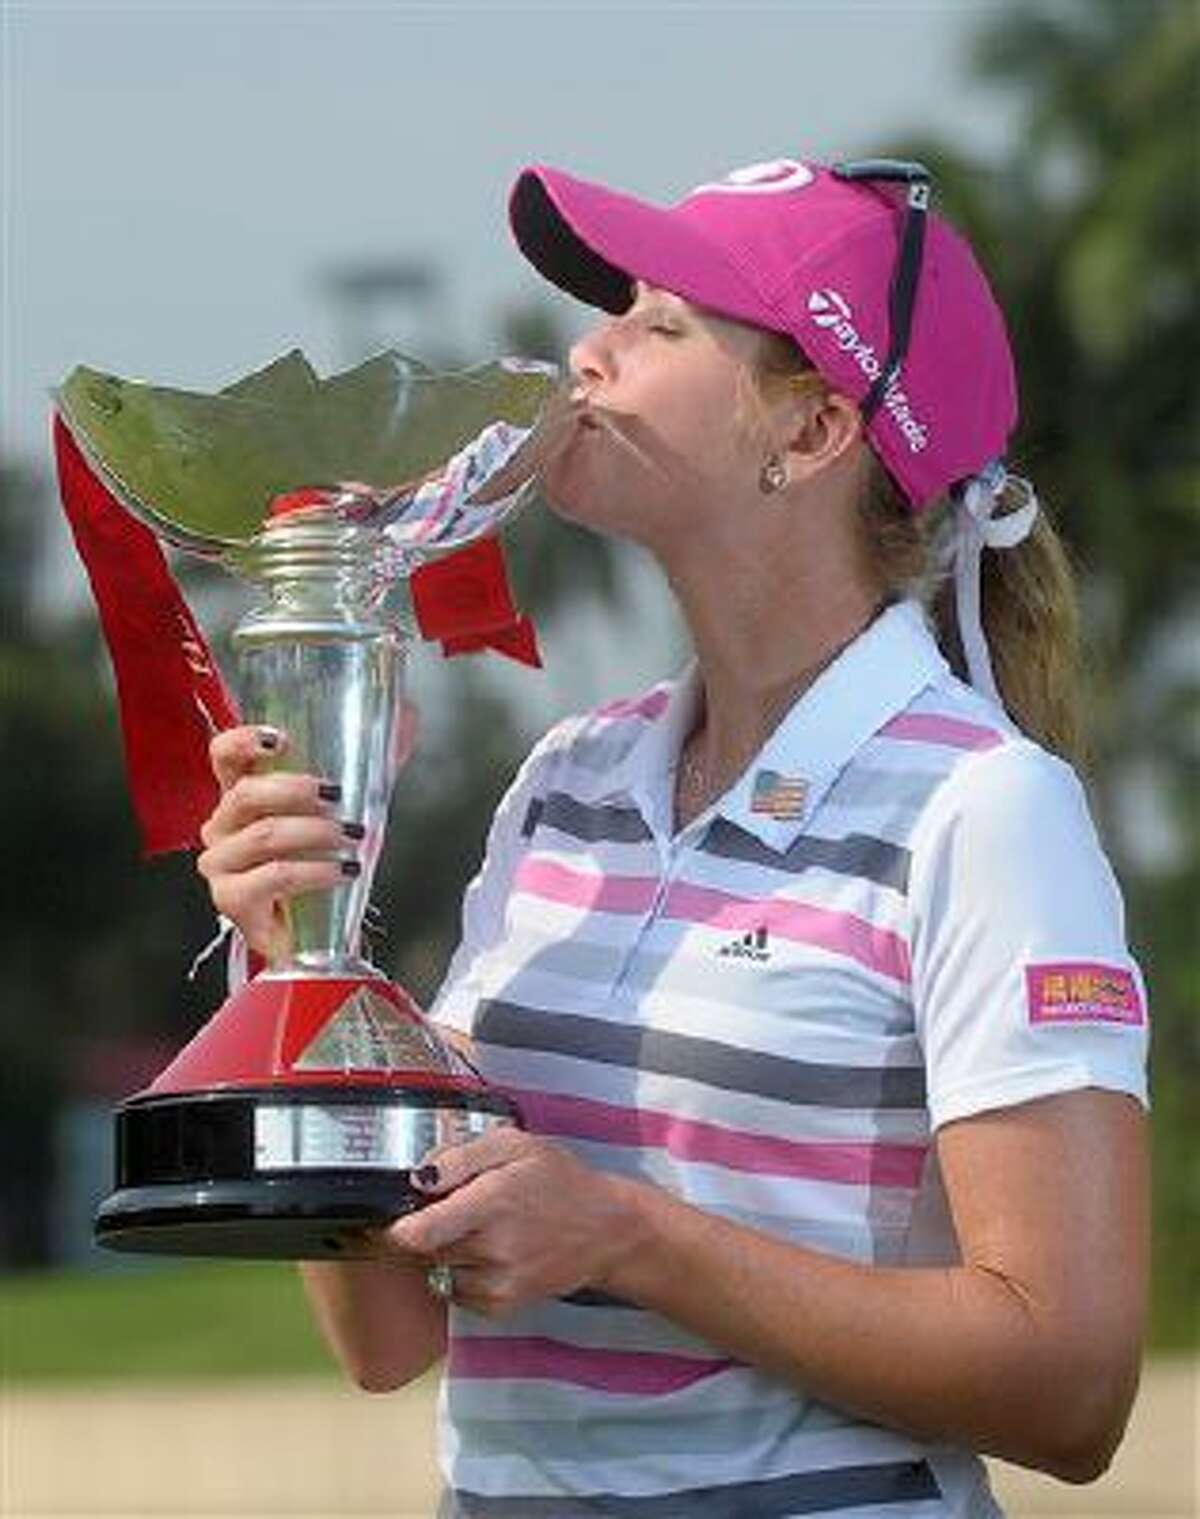 Paula Creamer of the U.S. kisses her champion trophy during the award ceremony of the HSBC Women's Champions golf tournament in Singapore, Sunday, Mar. 2, 2014. (AP Photo/Joseph Nair)